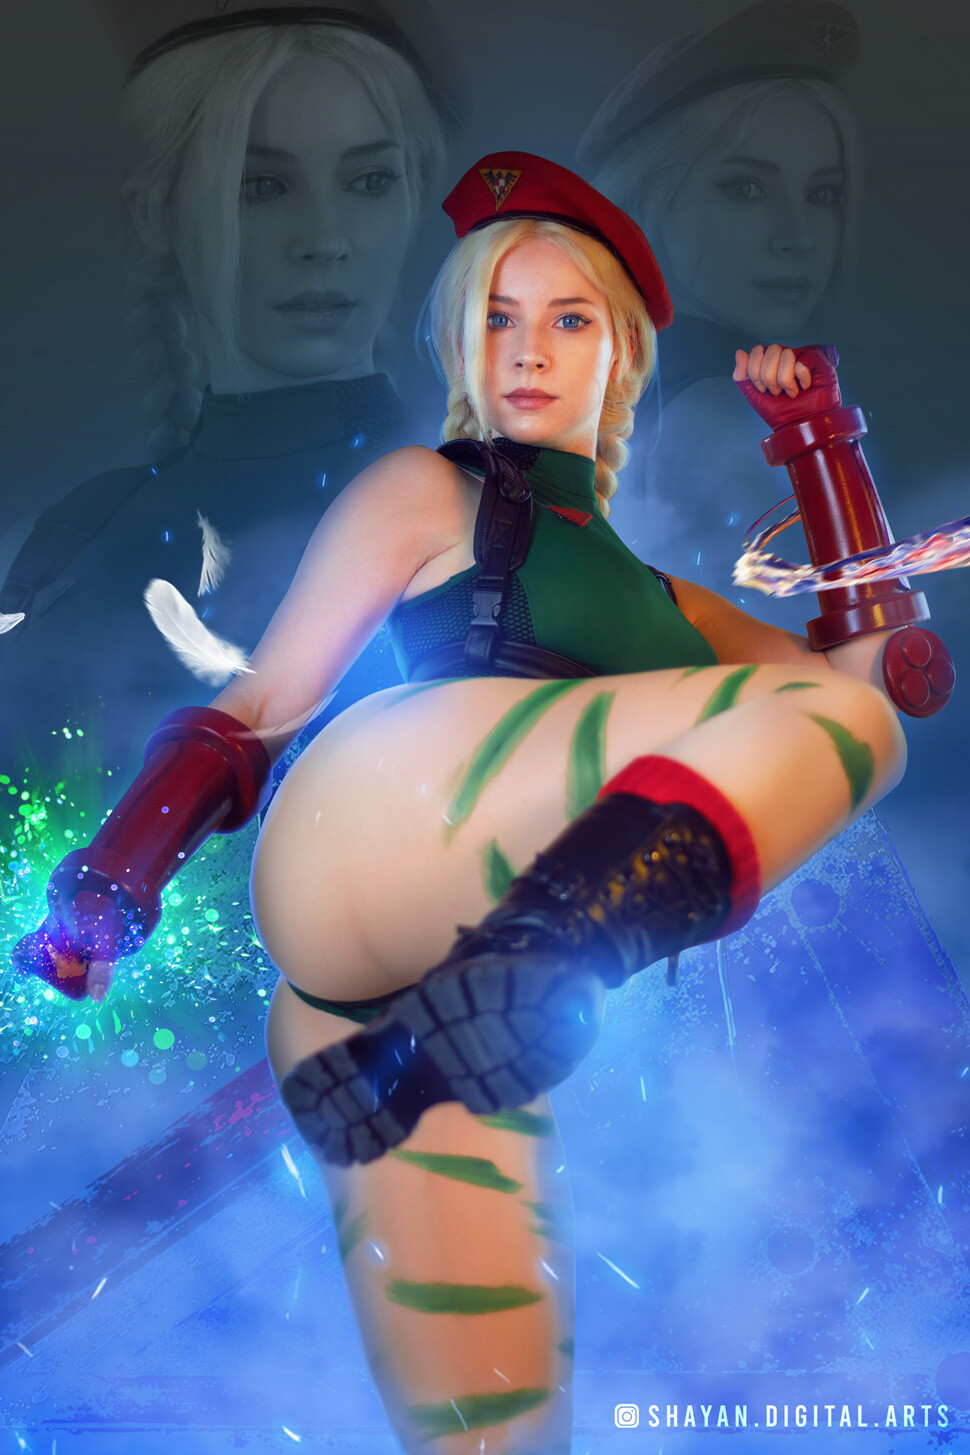 Enji Night has the perfect curves for cosplaying Cammy from Street Fighter